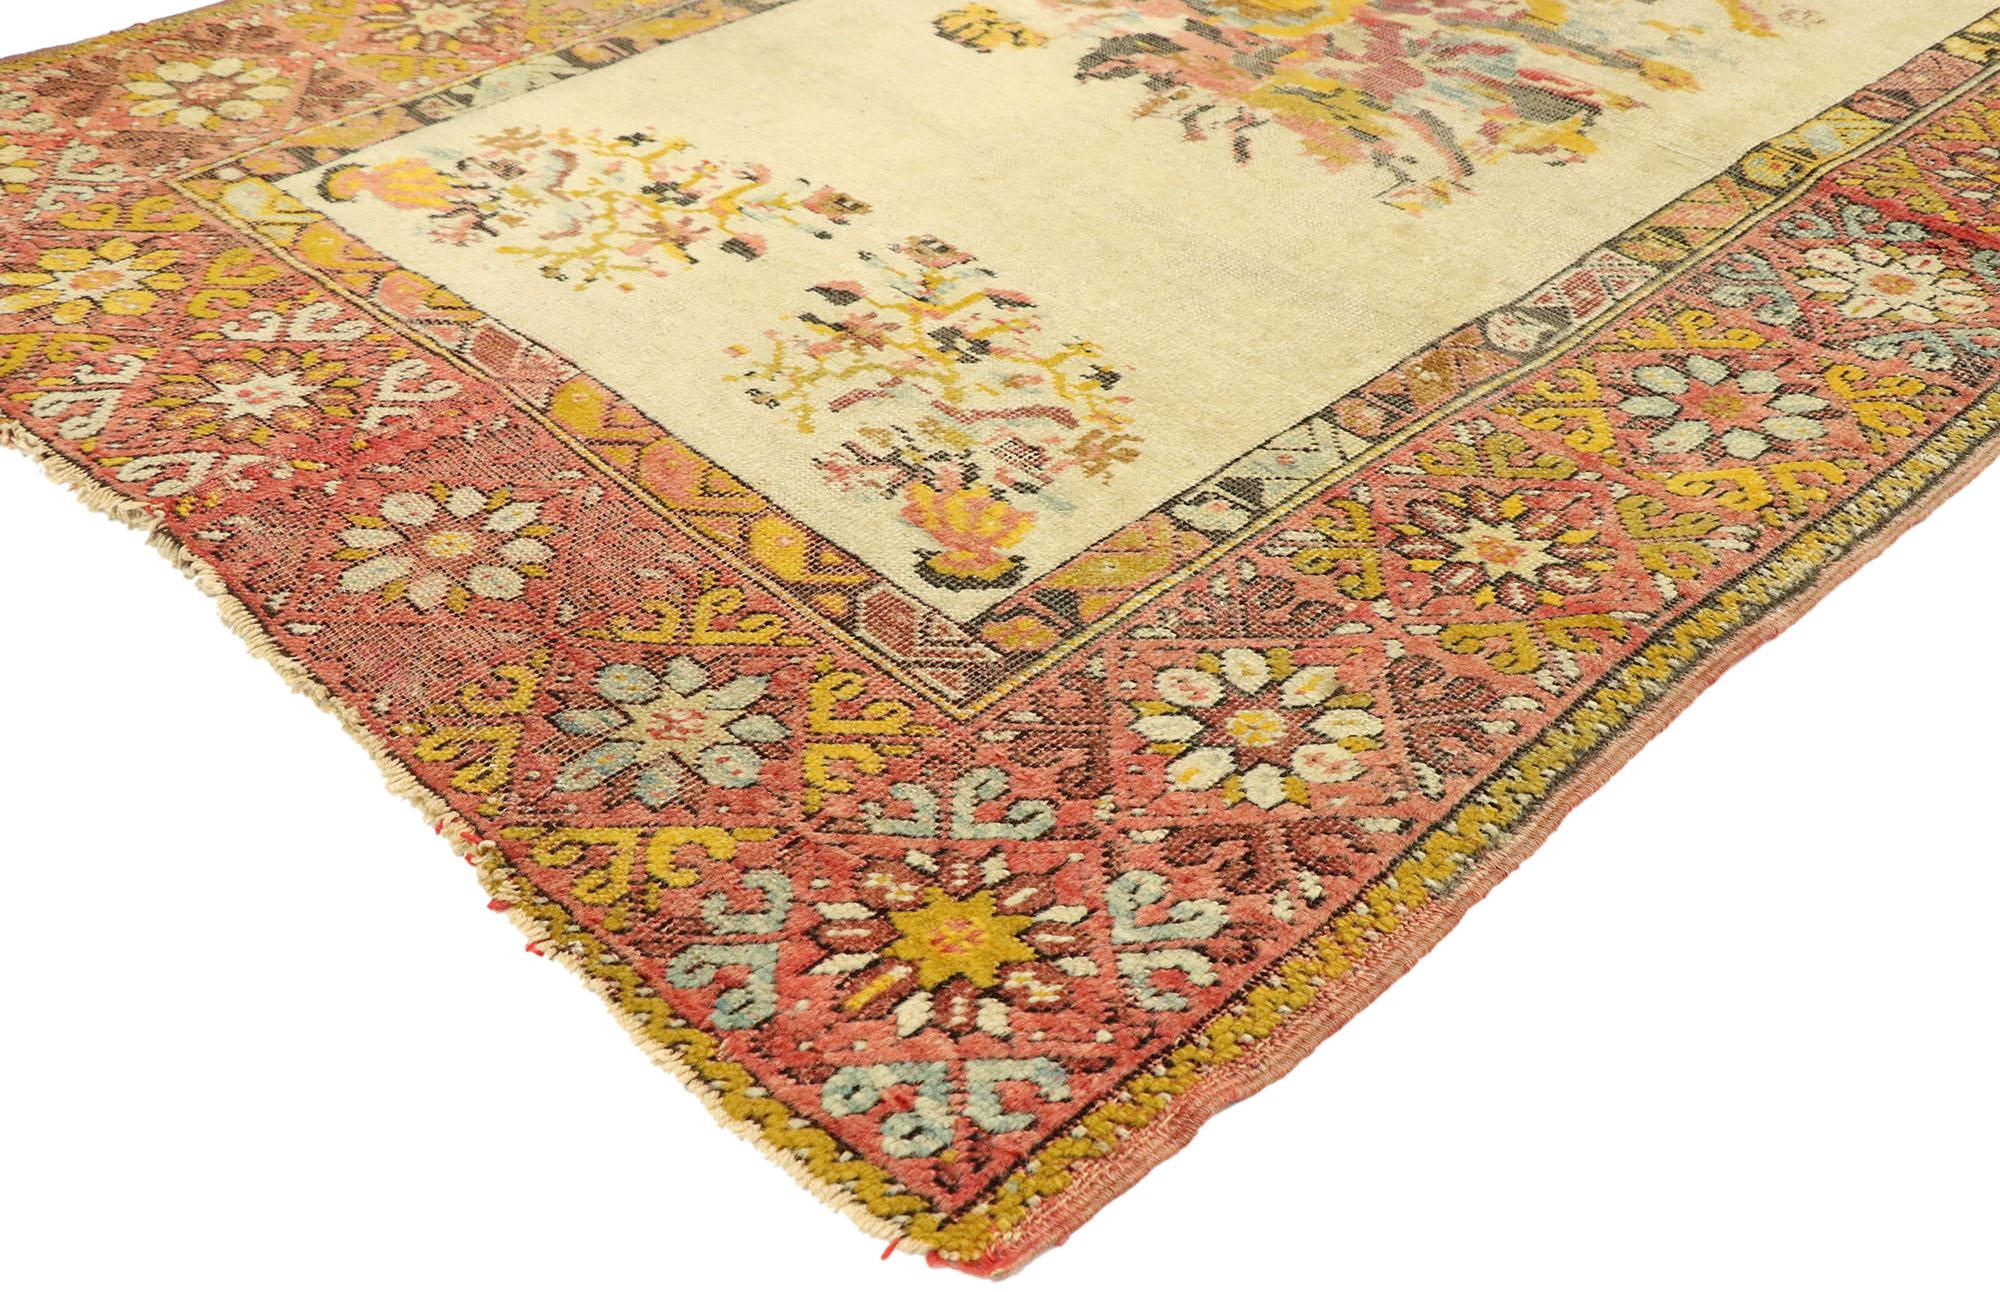 70870 Vintage Turkish Oushak Rug, 03'04 x 05'02. In this hand-knotted wool vintage Turkish Oushak rug, the convergence of romantic boho chic and the relaxed opulence of French Provincial design crafts an enchanting narrative of style. Intricately